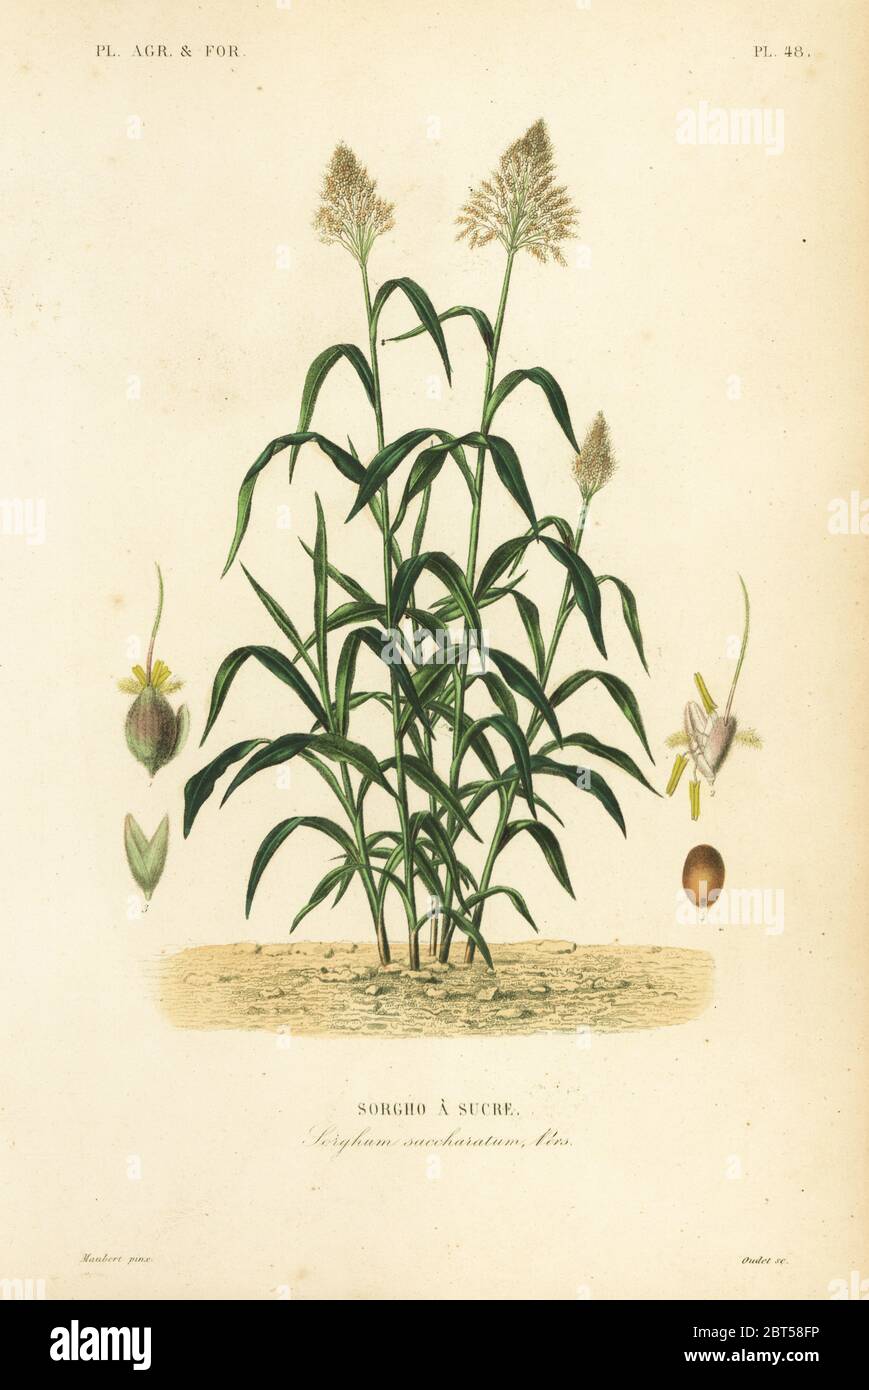 Sorghum grass, great millet, durra, jowari or milo, Sorghum bicolor, Sorghum saccharatum, Sorgho a sucre. Handcoloured steel engraving by Oudet after a botanical illustration by Edouard Maubert from Pierre Oscar Reveil, A. Dupuis, Fr. Gerard and Francois Herincqs La Regne Vegetal: Planets Agricoles et Forestieres, L. Guerin, Paris, 1864-1871. Stock Photo